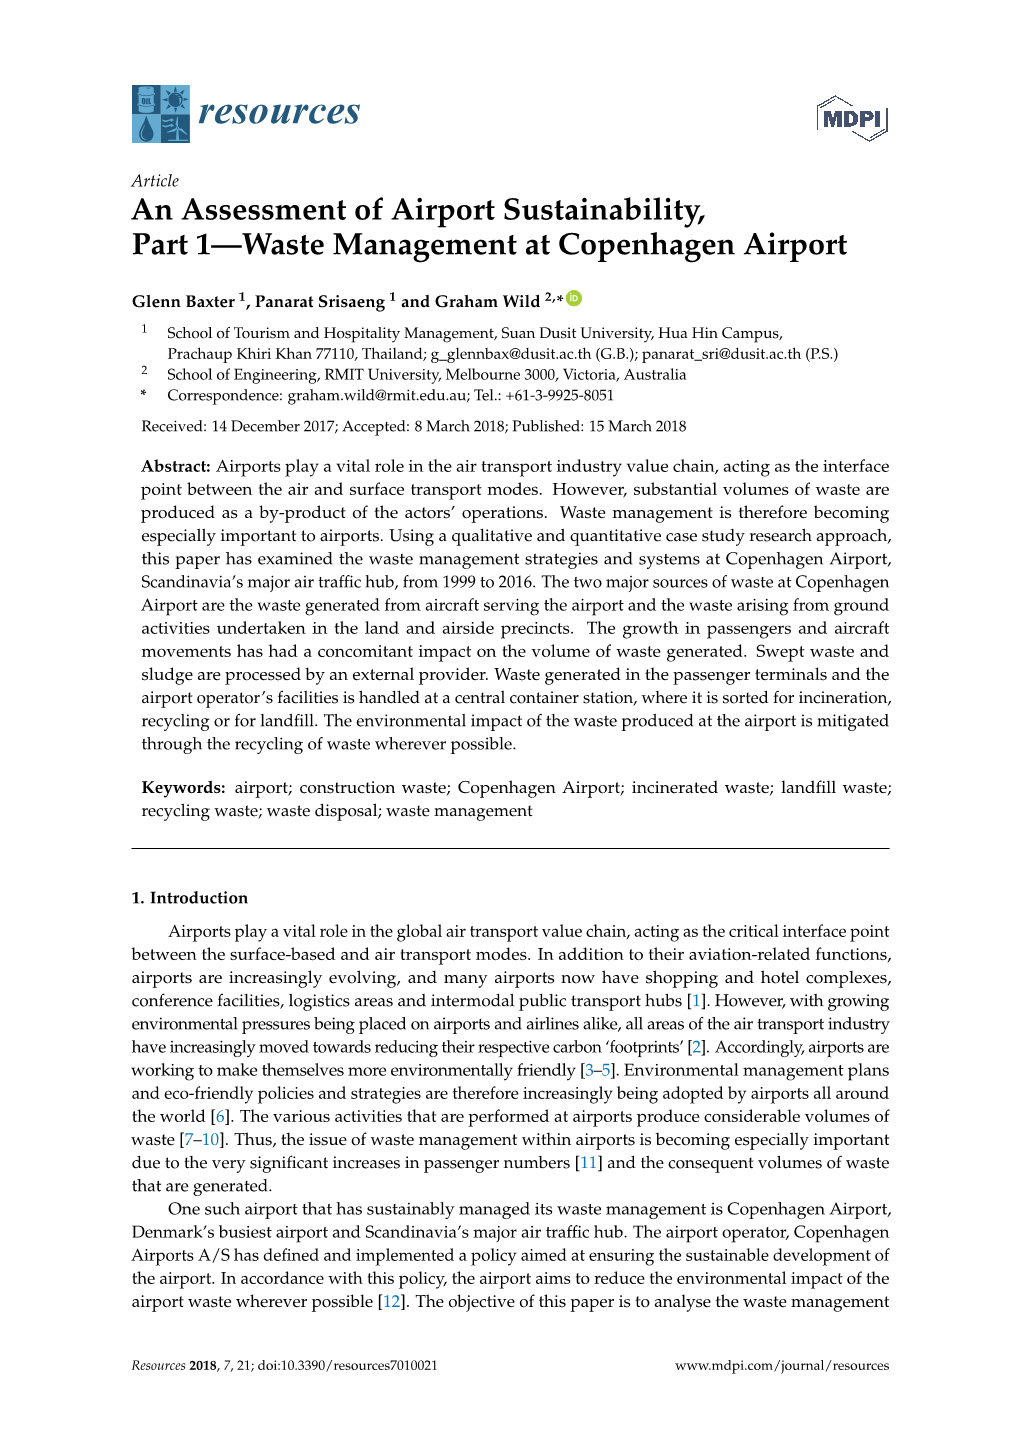 An Assessment of Airport Sustainability, Part 1—Waste Management at Copenhagen Airport